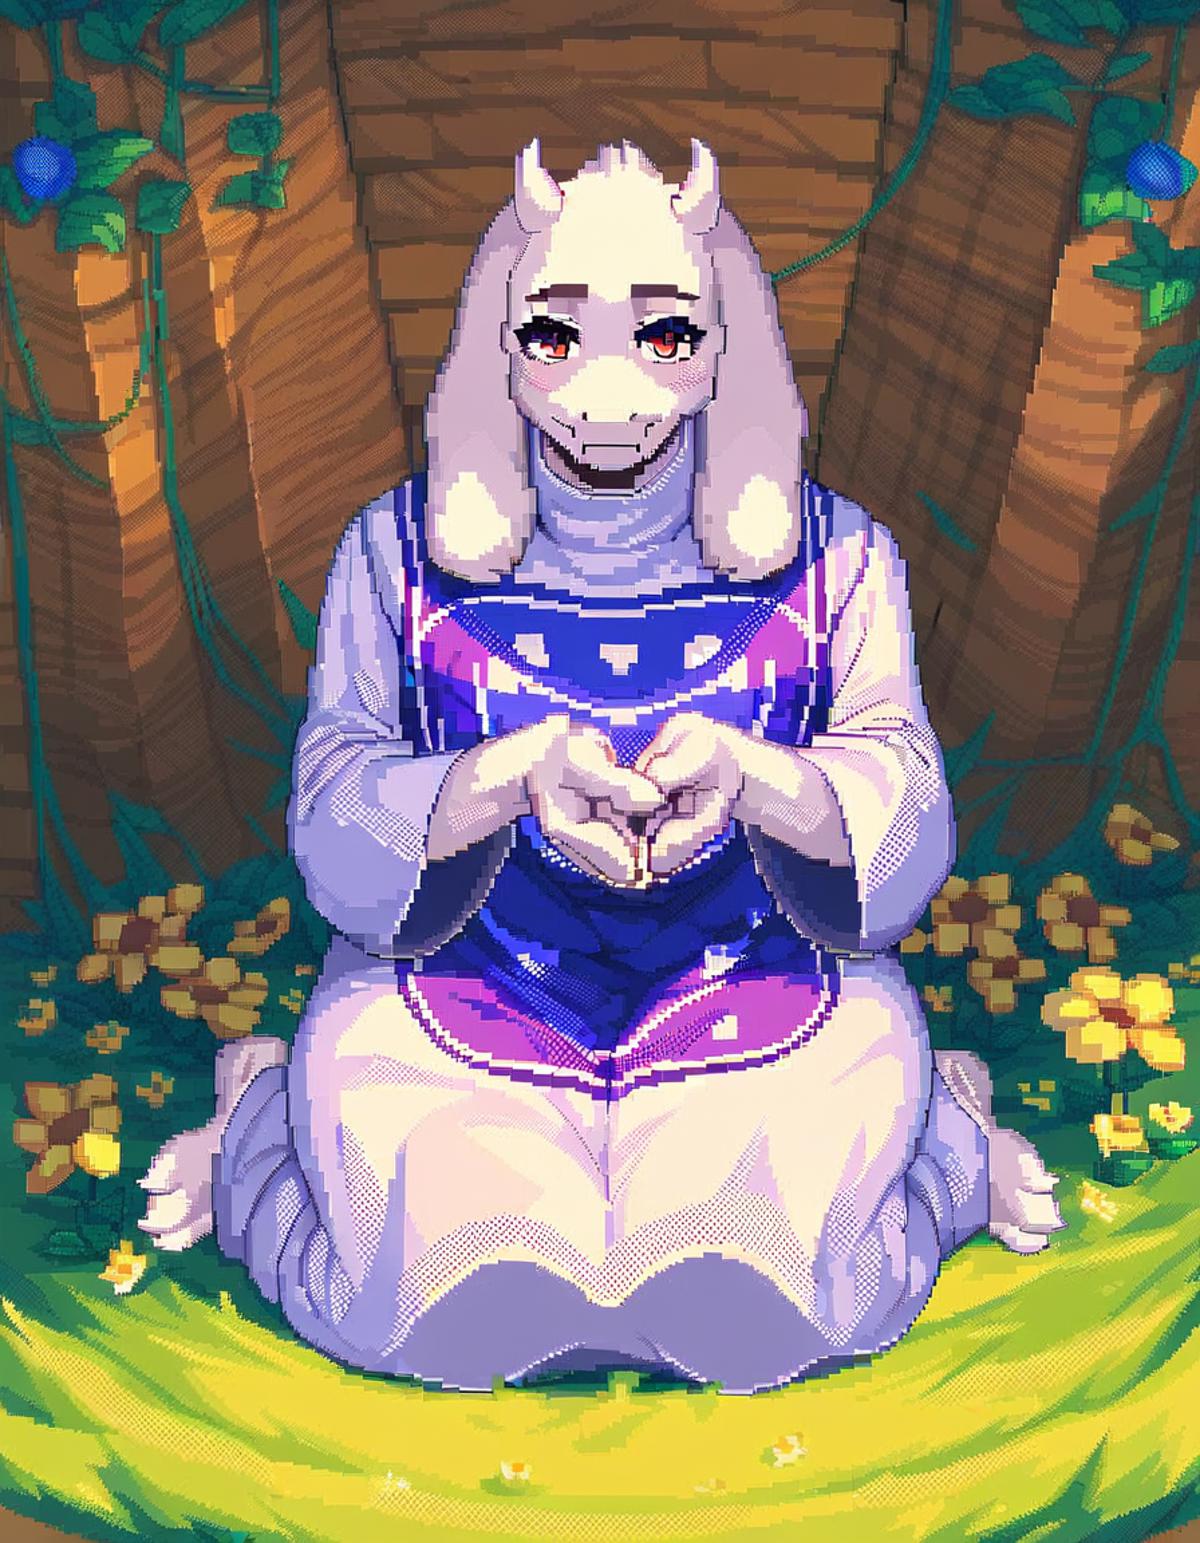 A cartoon image of a white and purple dressed goat or horse, sitting on the grass, with yellow flowers around her.